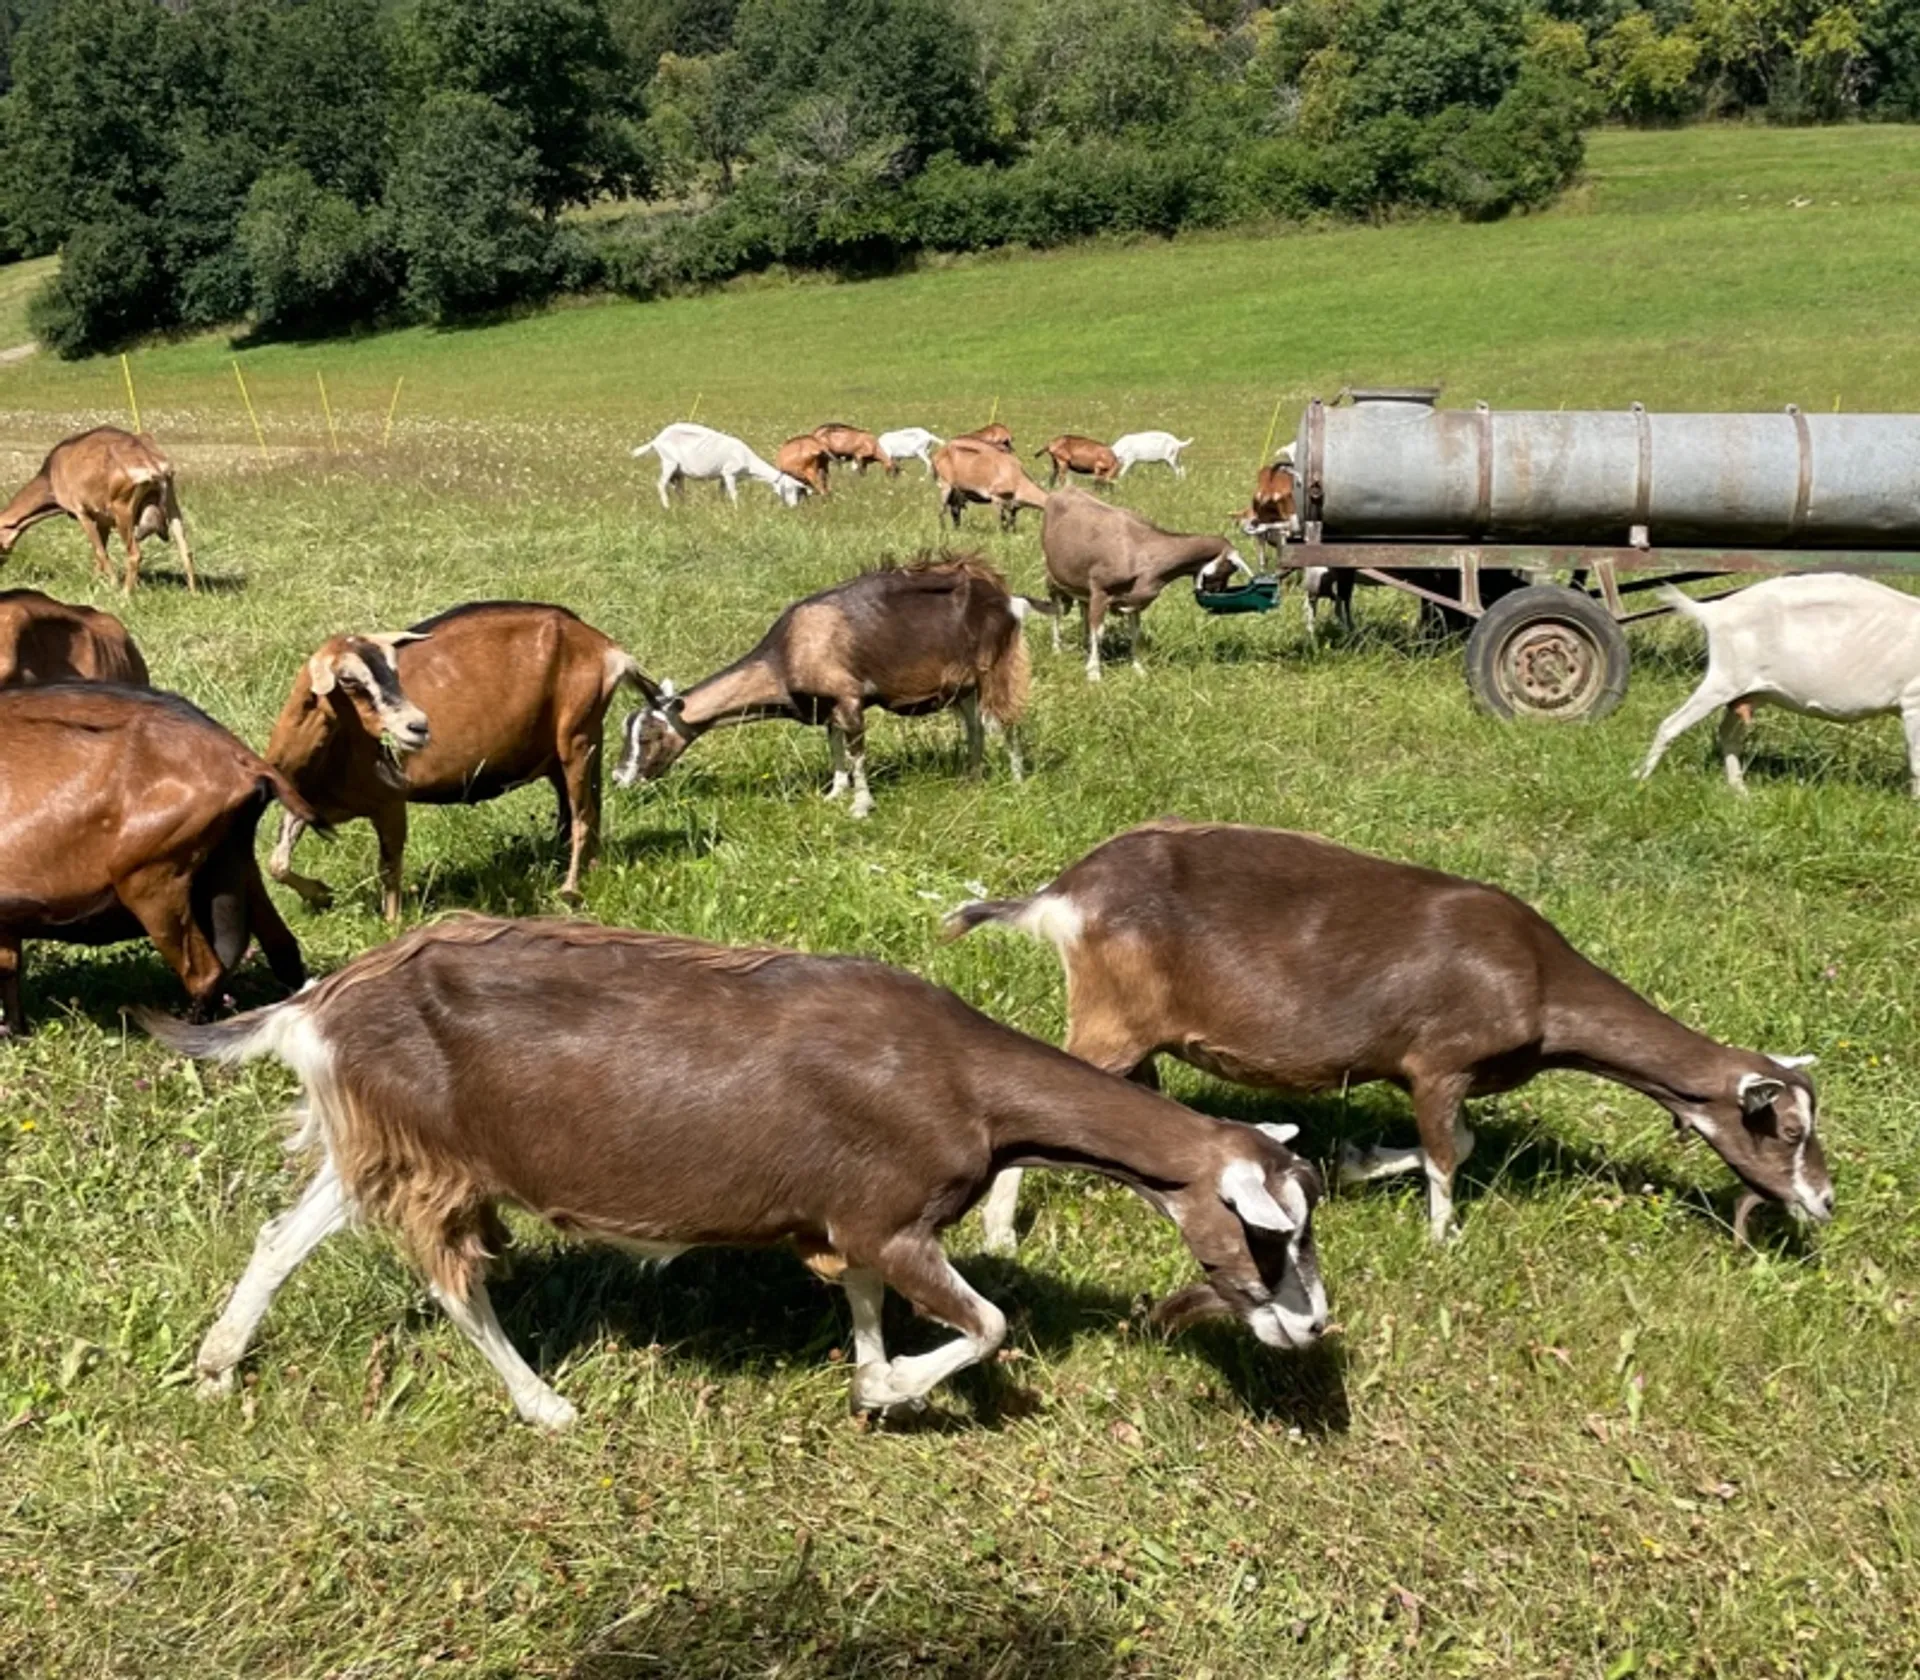 Animal Subcontracting - Getting the Union's Goat!